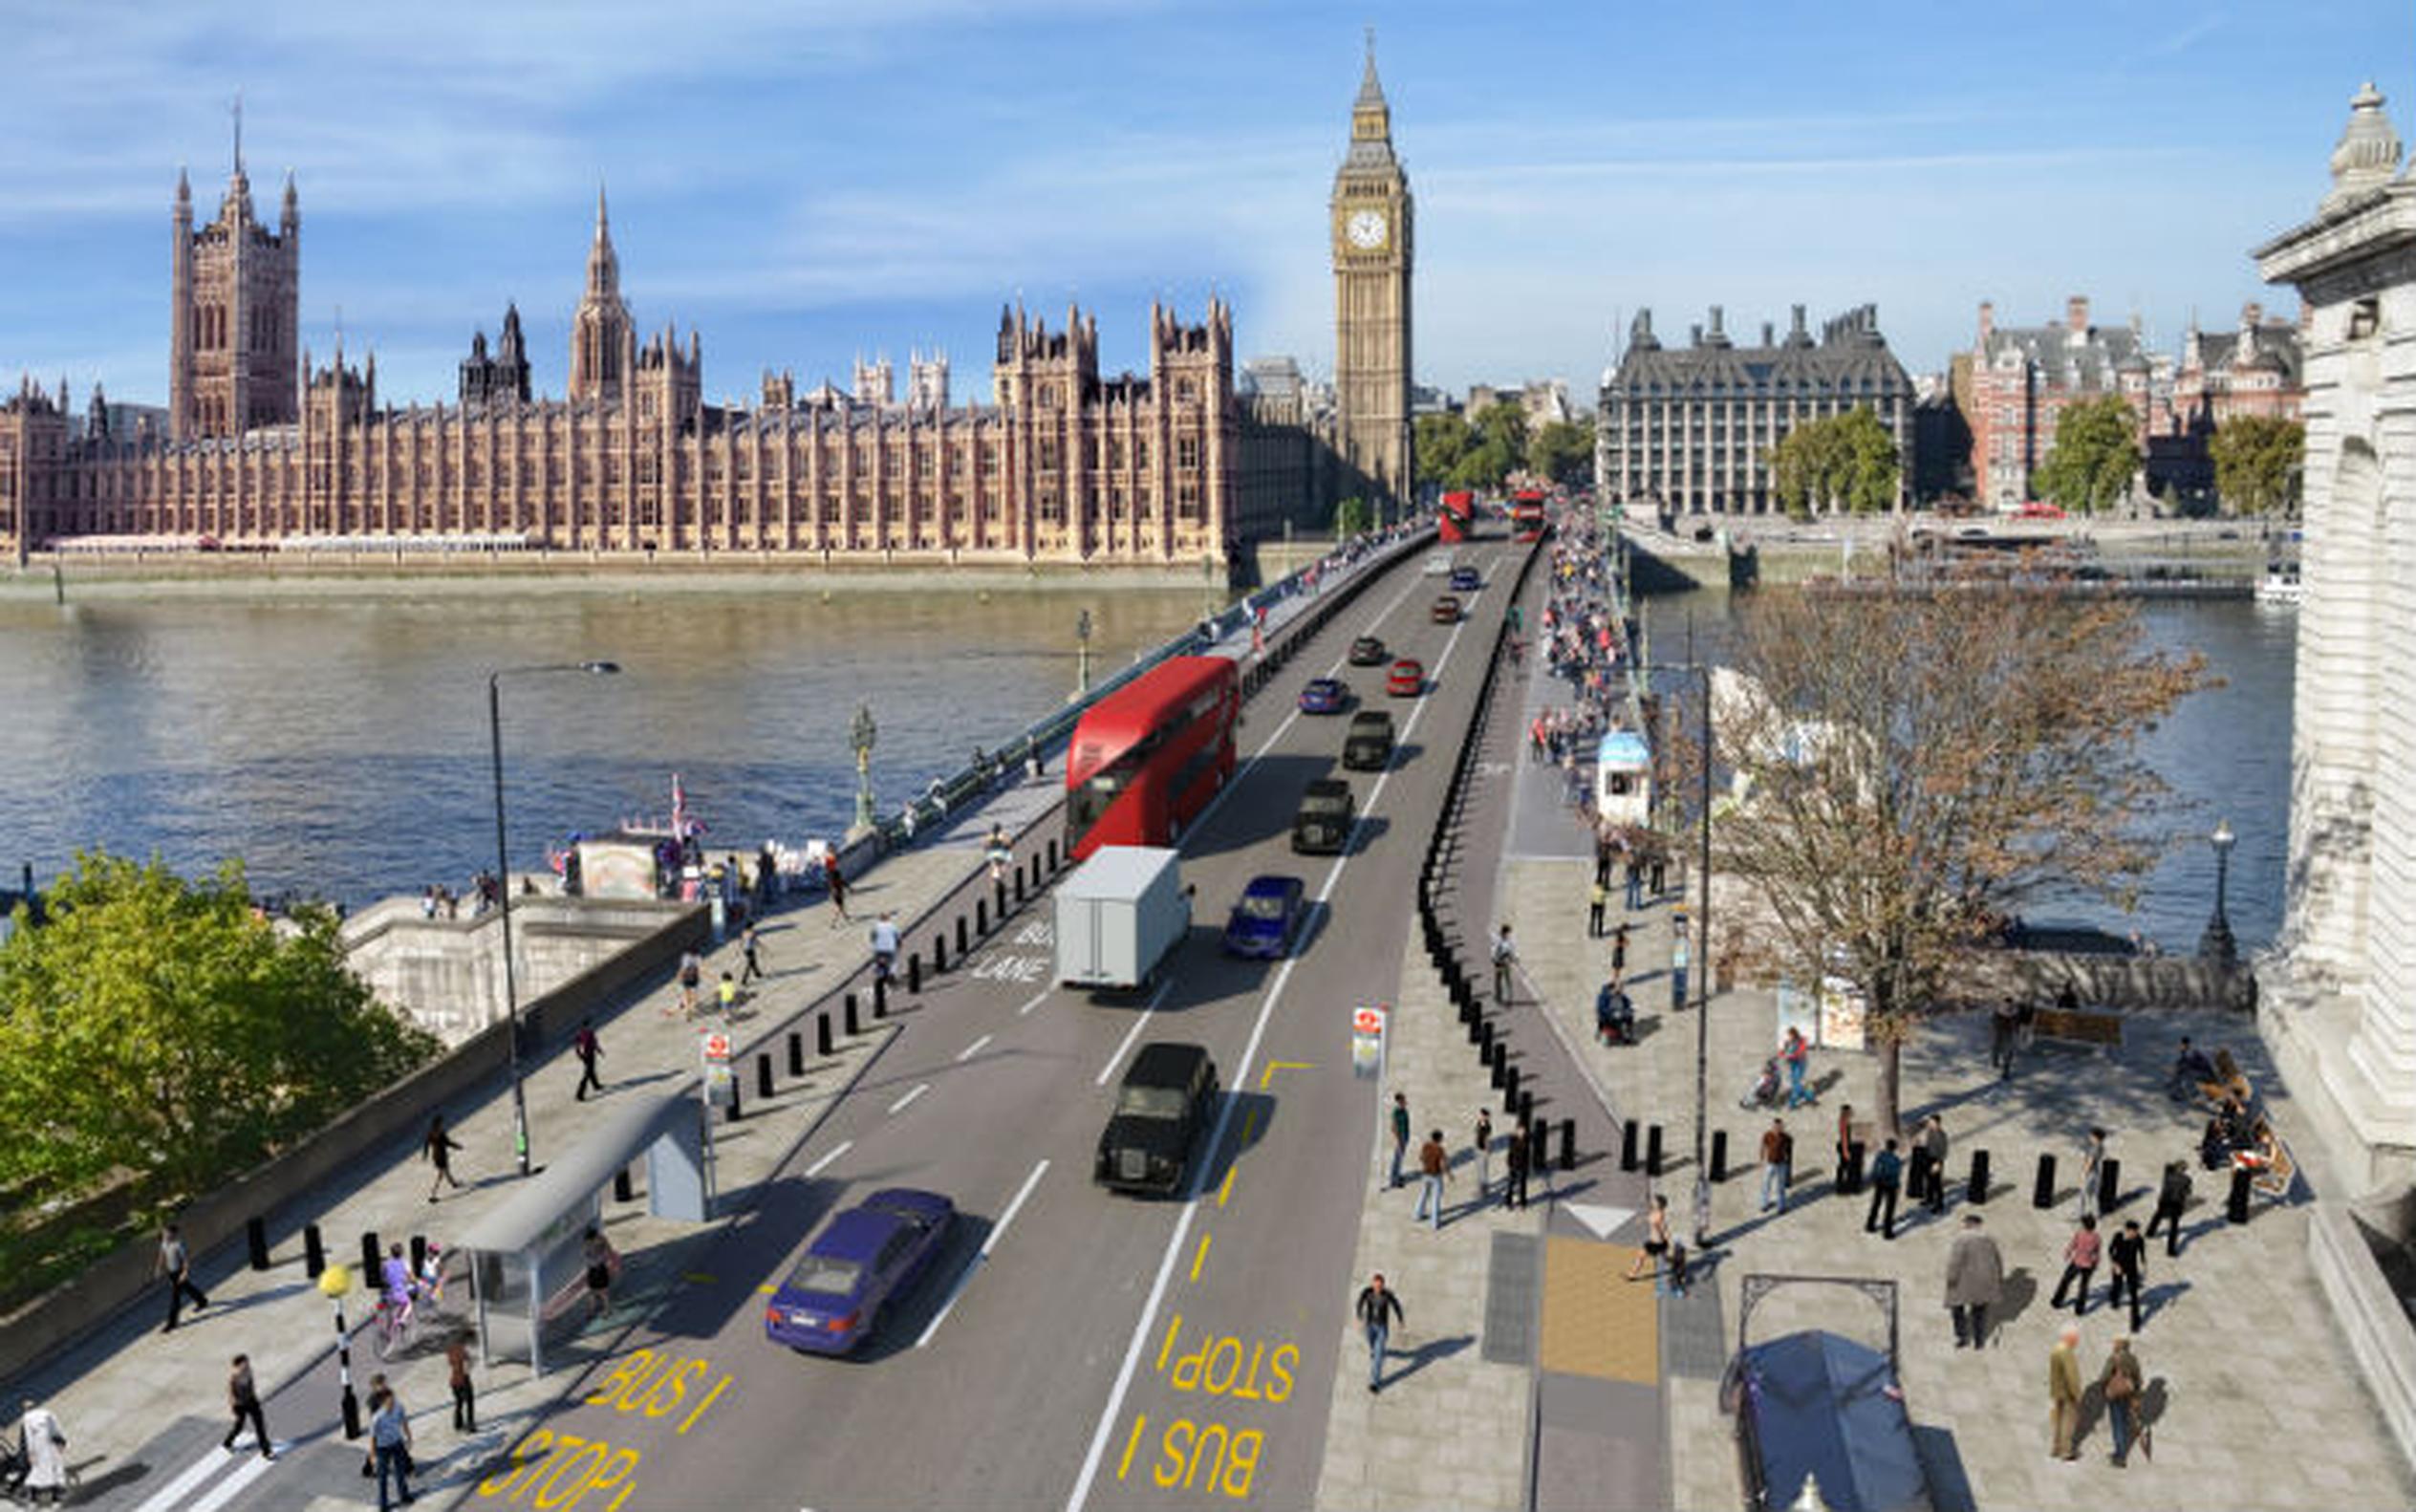 Proposed design for security measures on Westminster Bridge